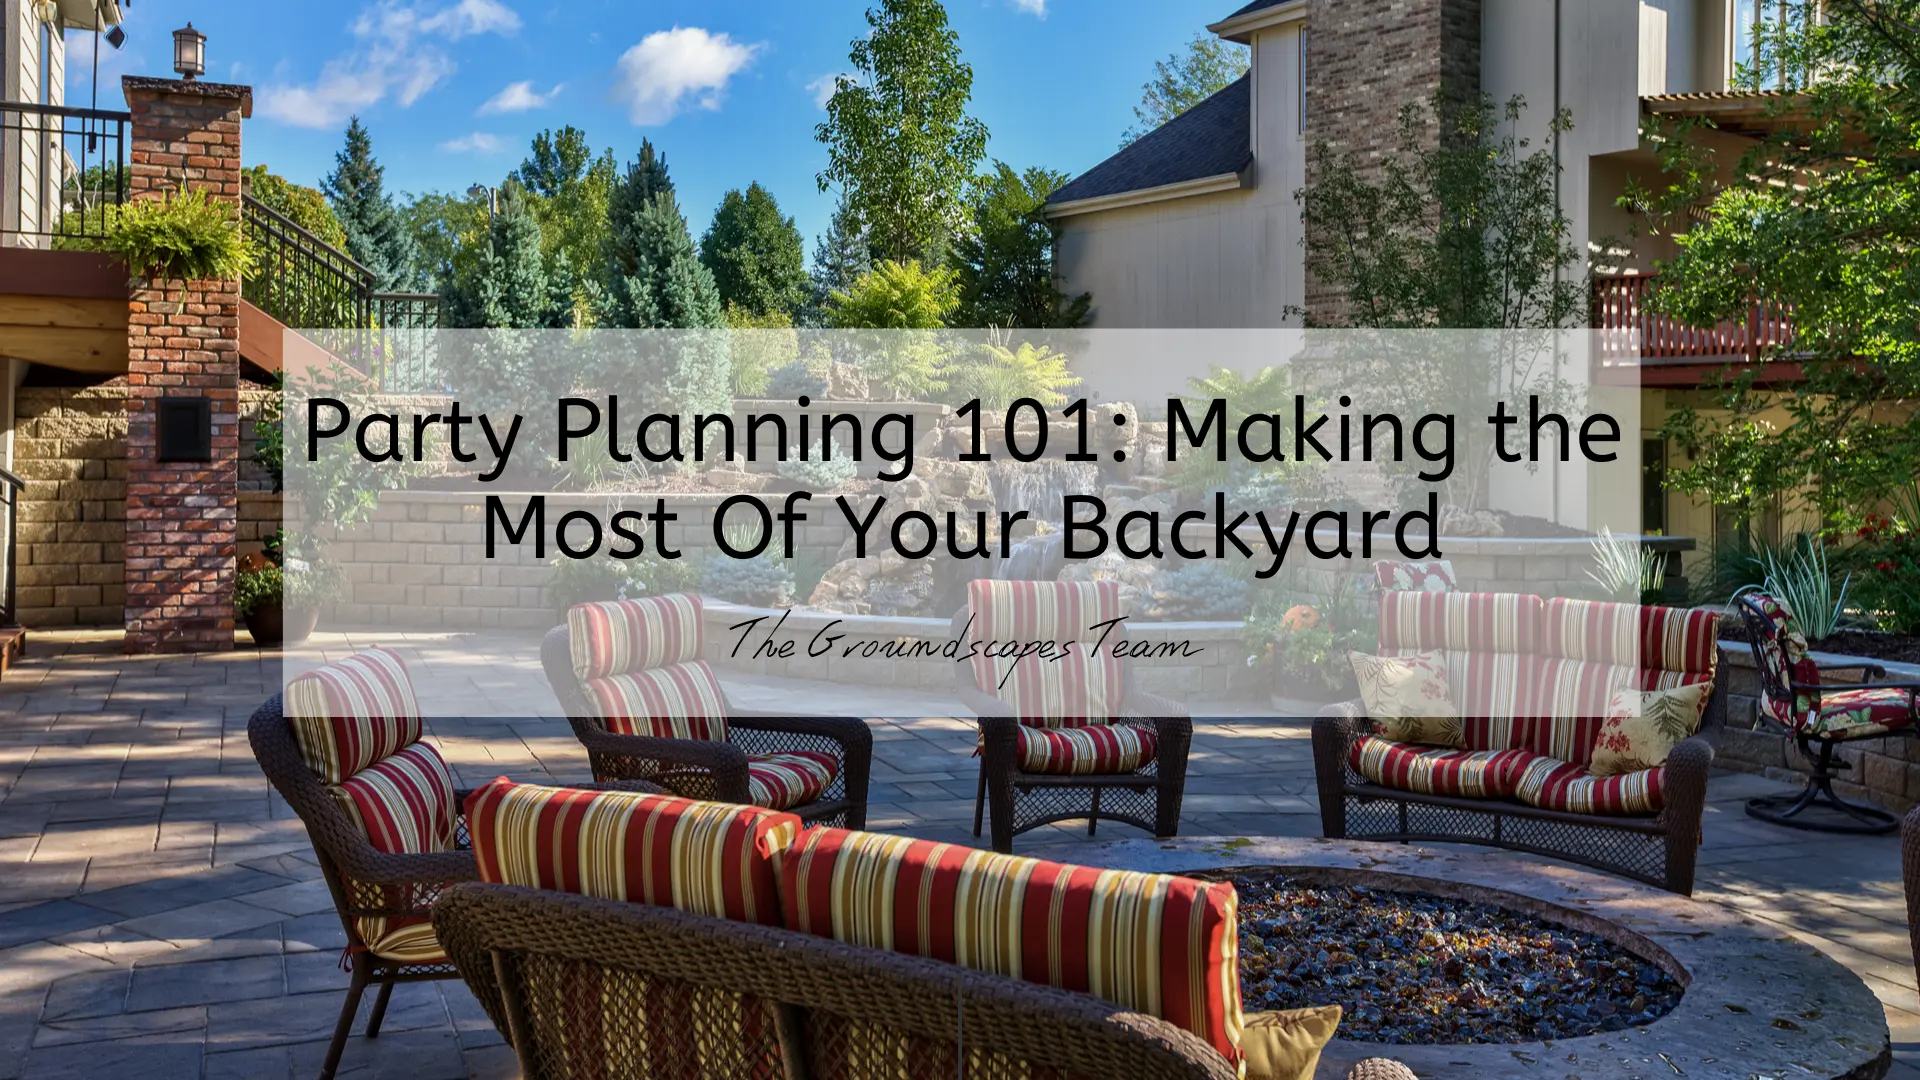 Party Planning 101: Making the Most of Your Backyard